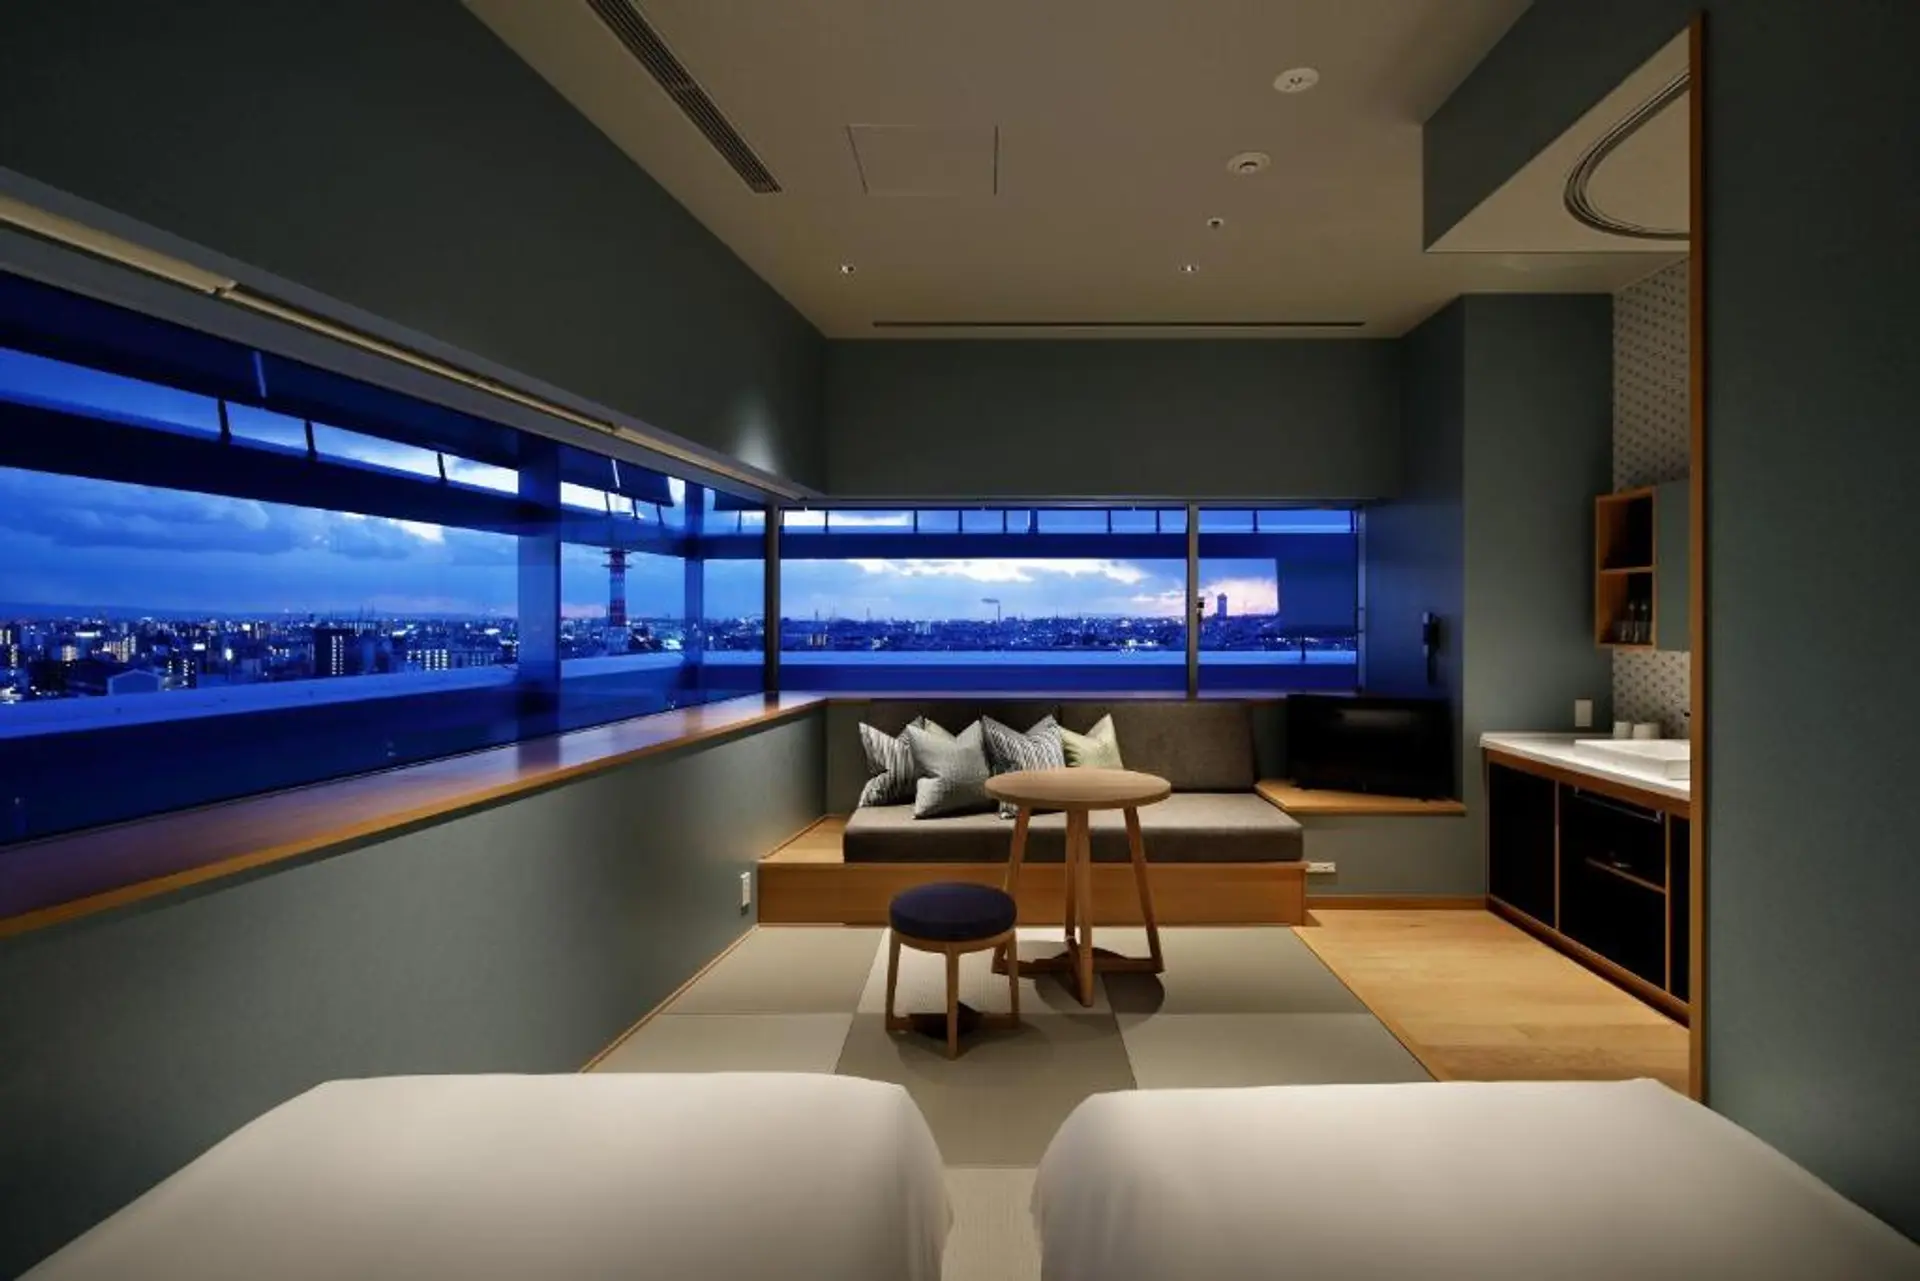 Hotel room, private kitchen, seating area with evening view of Osaka.